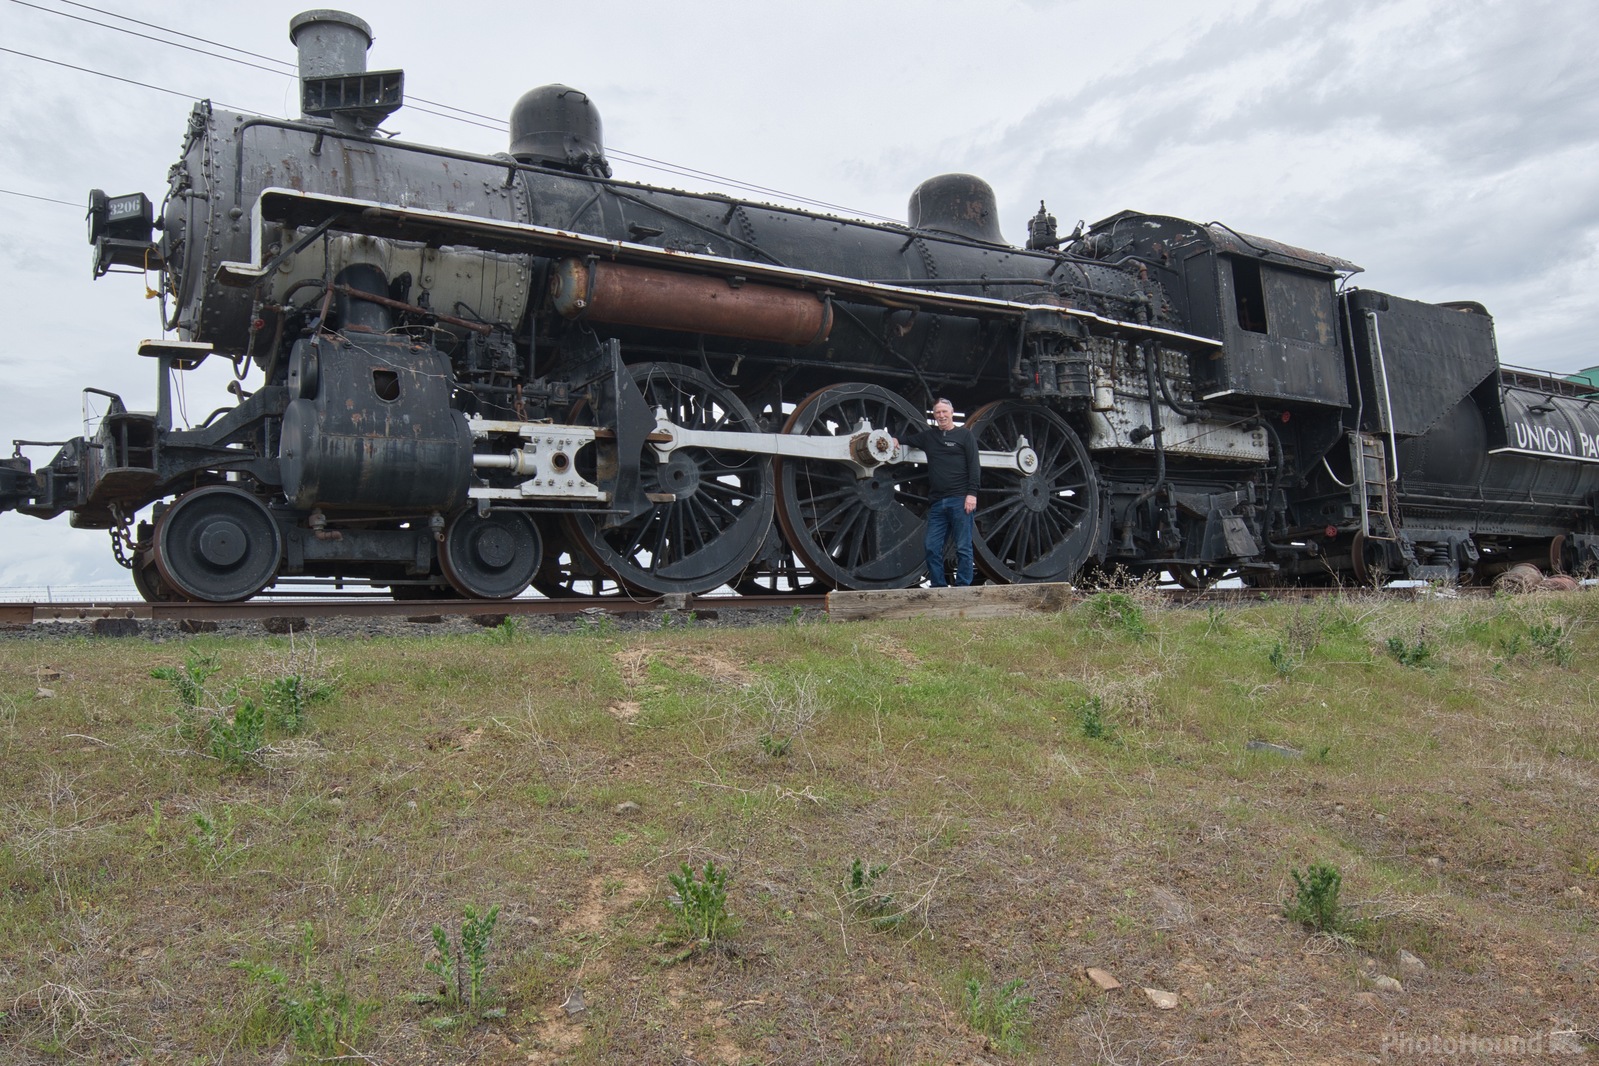 Image of Inland NW Rail Museum by Steve West